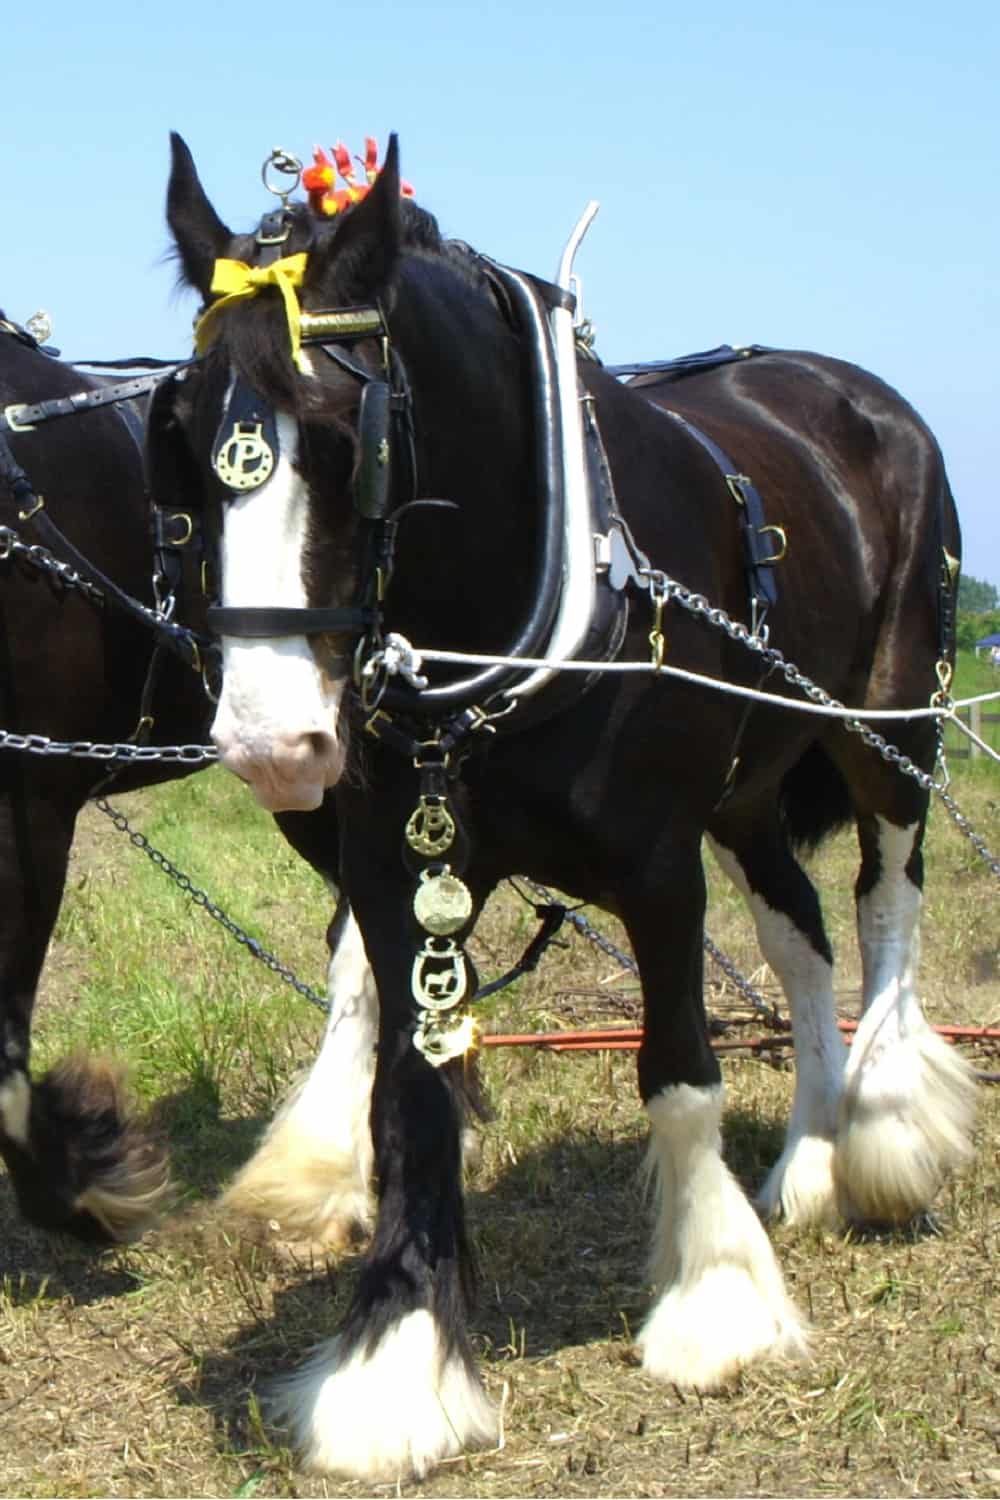 Shire horse work